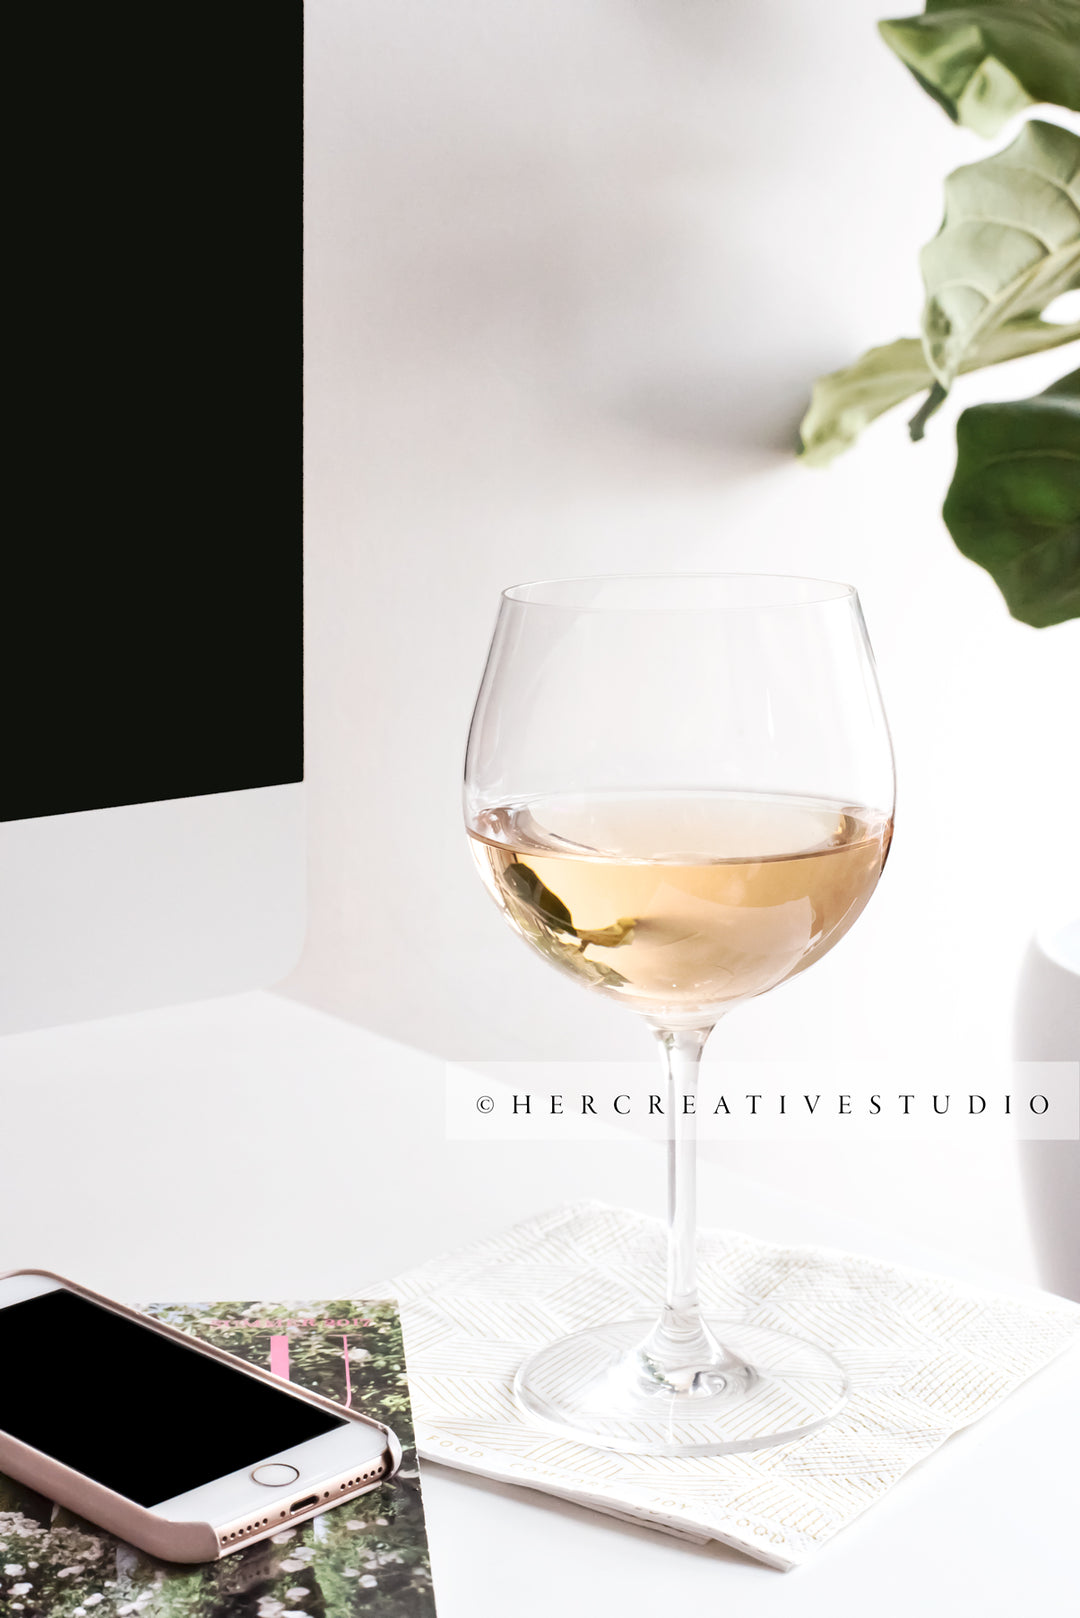 Glass of Wine on Her Workspace, Styled Image